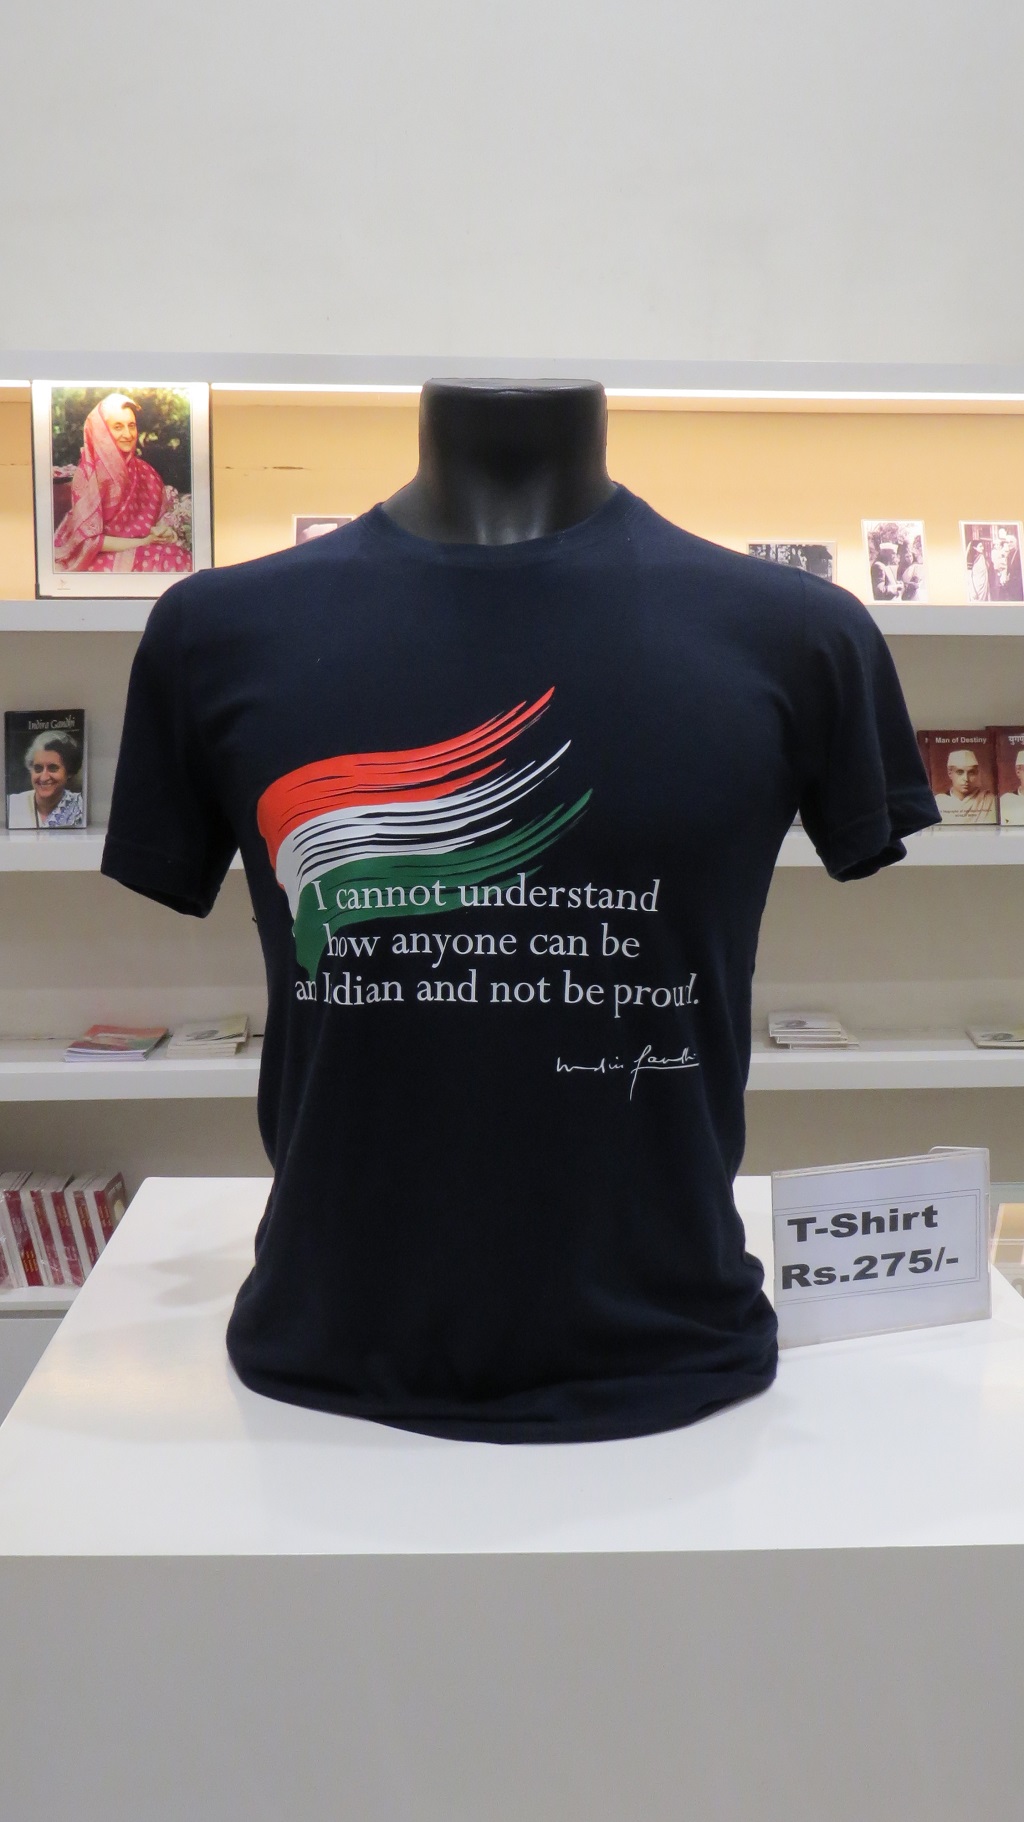 Quote by Indira Gandhi on a T-shirt